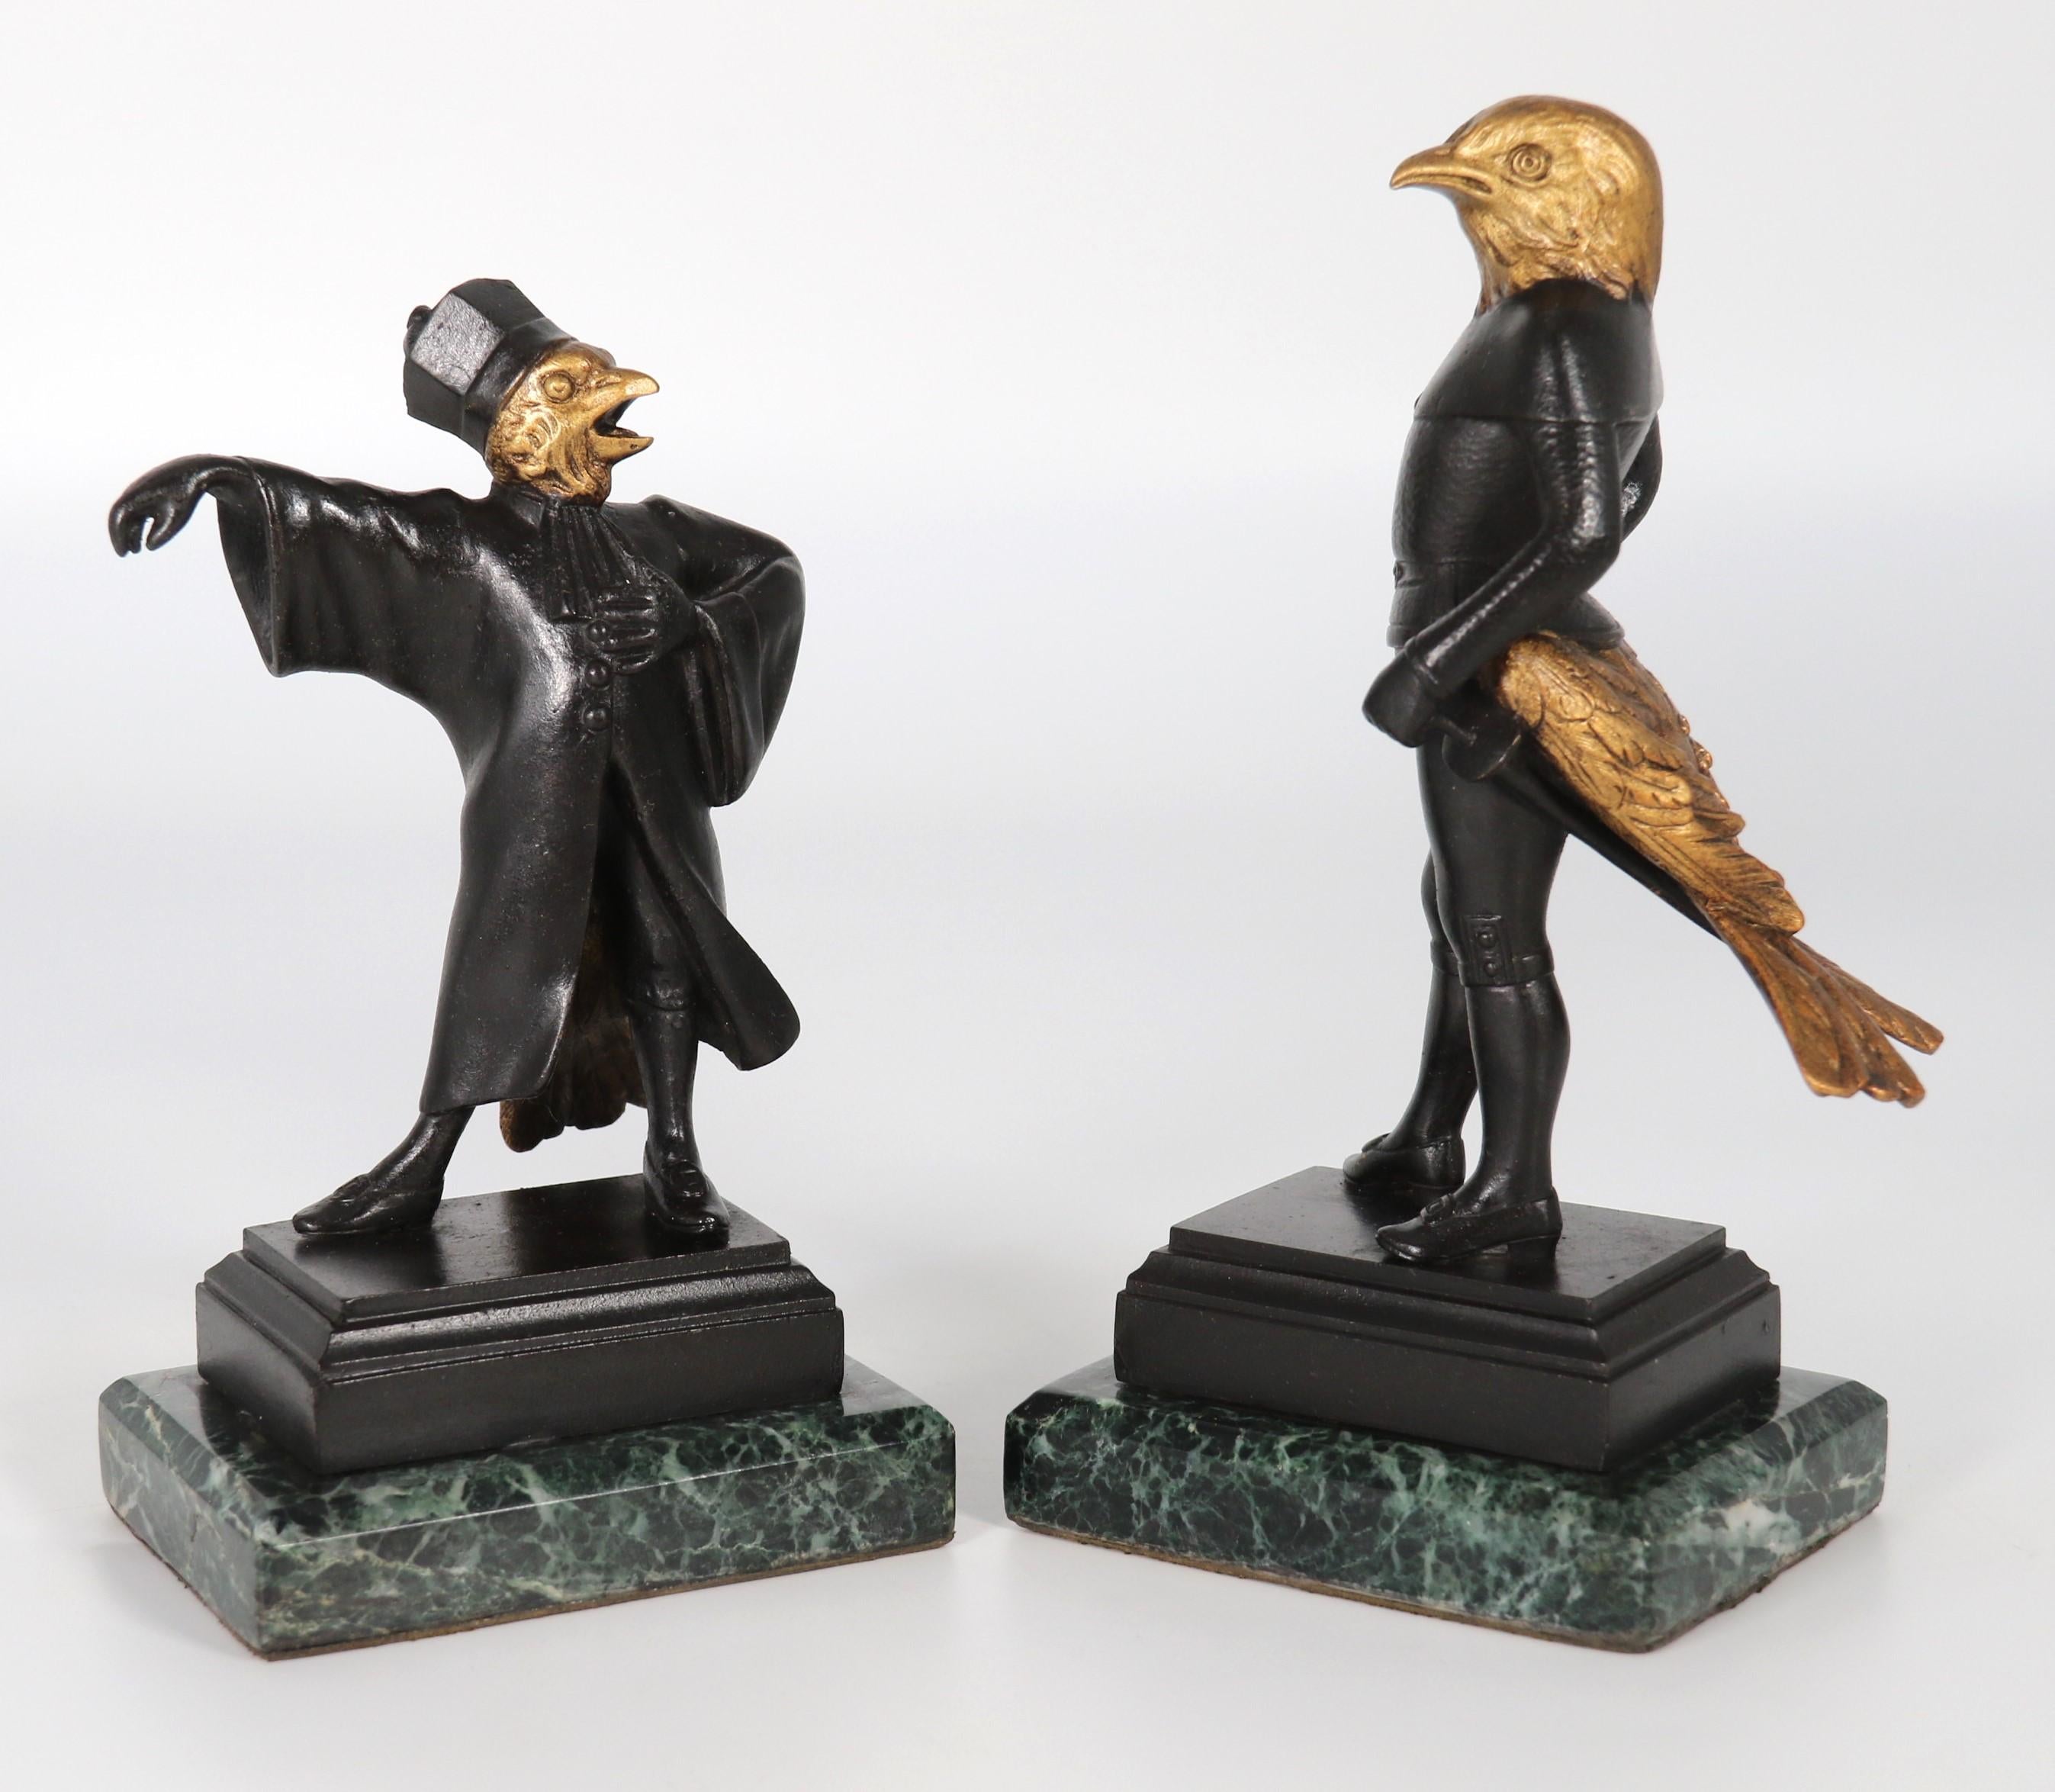 A most unusual pair of late 19th century bronze figures depicting caricatures of a jackdaw and crow, each with human bodies including torso, legs and arms,  and tail feathers with a bird head, each figure is dressed in theatrical costume whilst